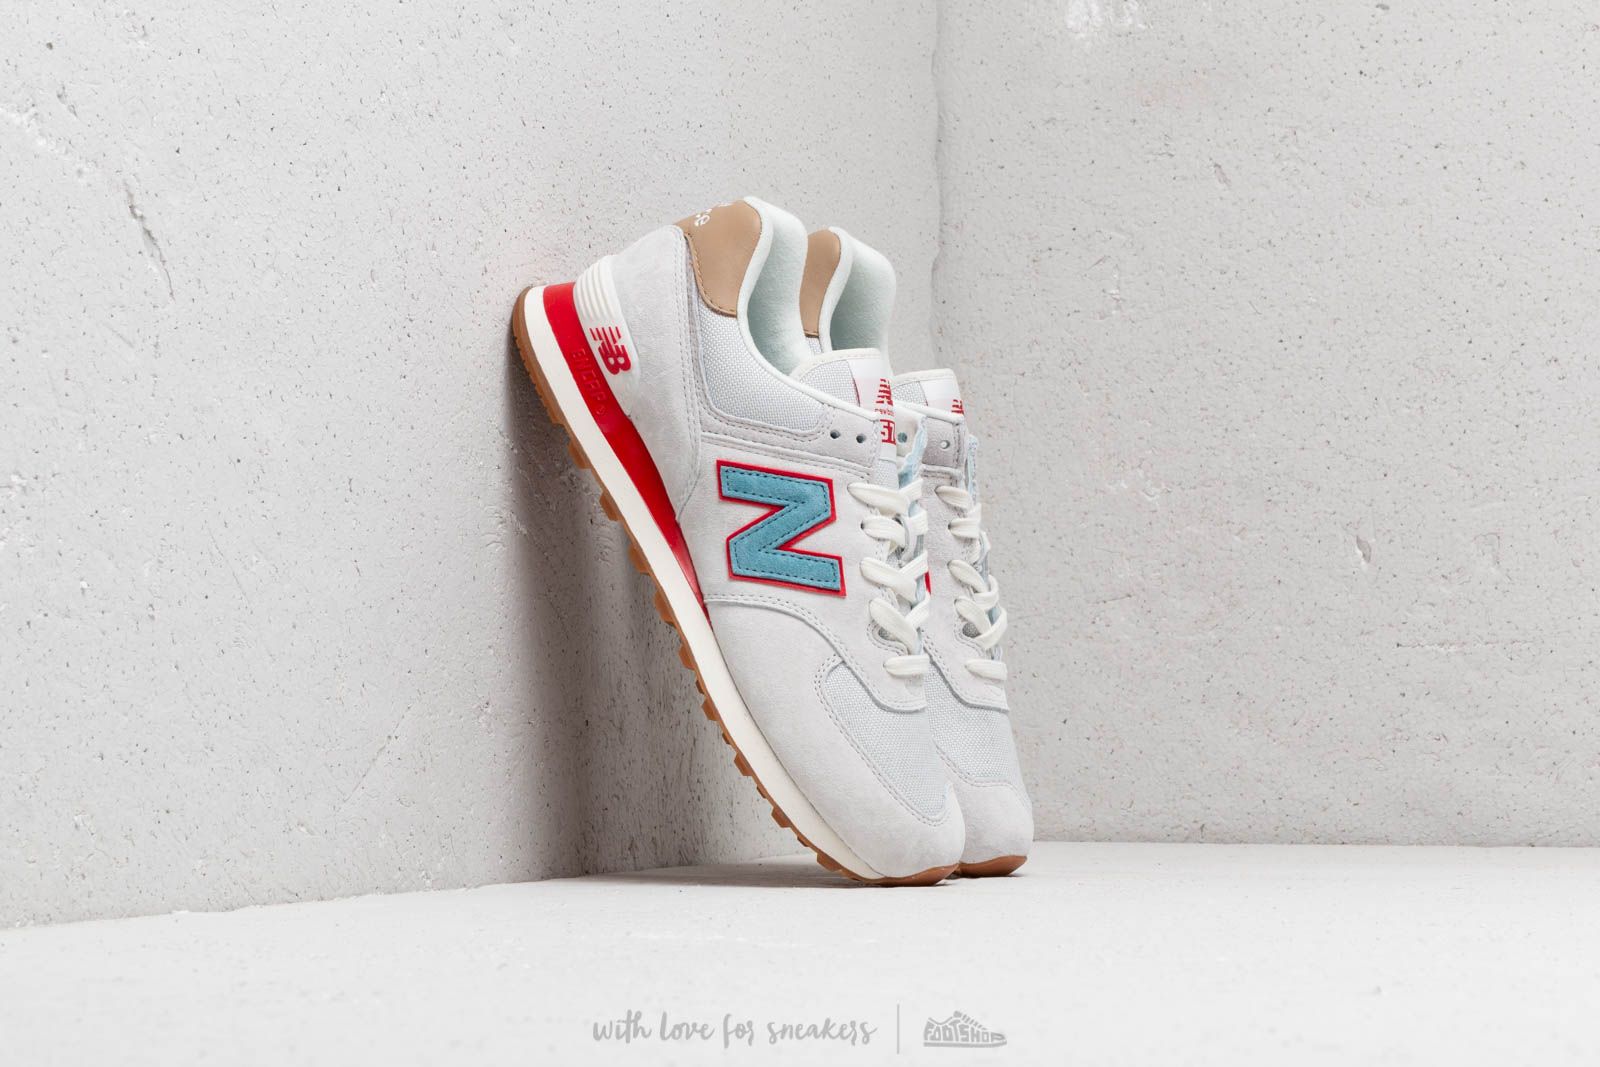 Chaussures et baskets homme New Balance 574 Grey/ Blue/ Red